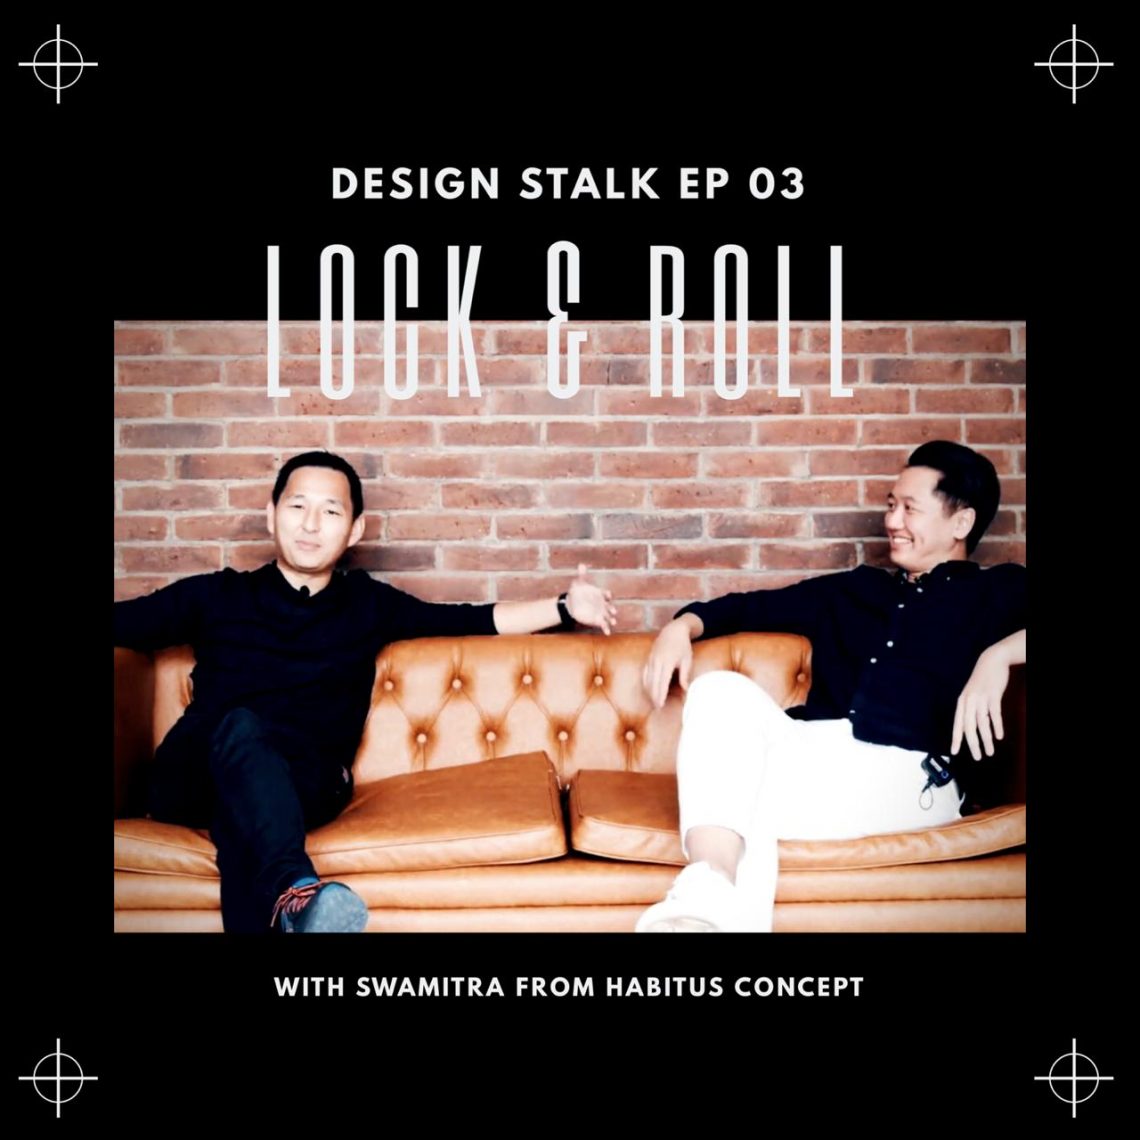 DESIGN STALK EP #03 LOCK AND ROLL WITH SWAMITRA FROM HABITUS CONCEPT